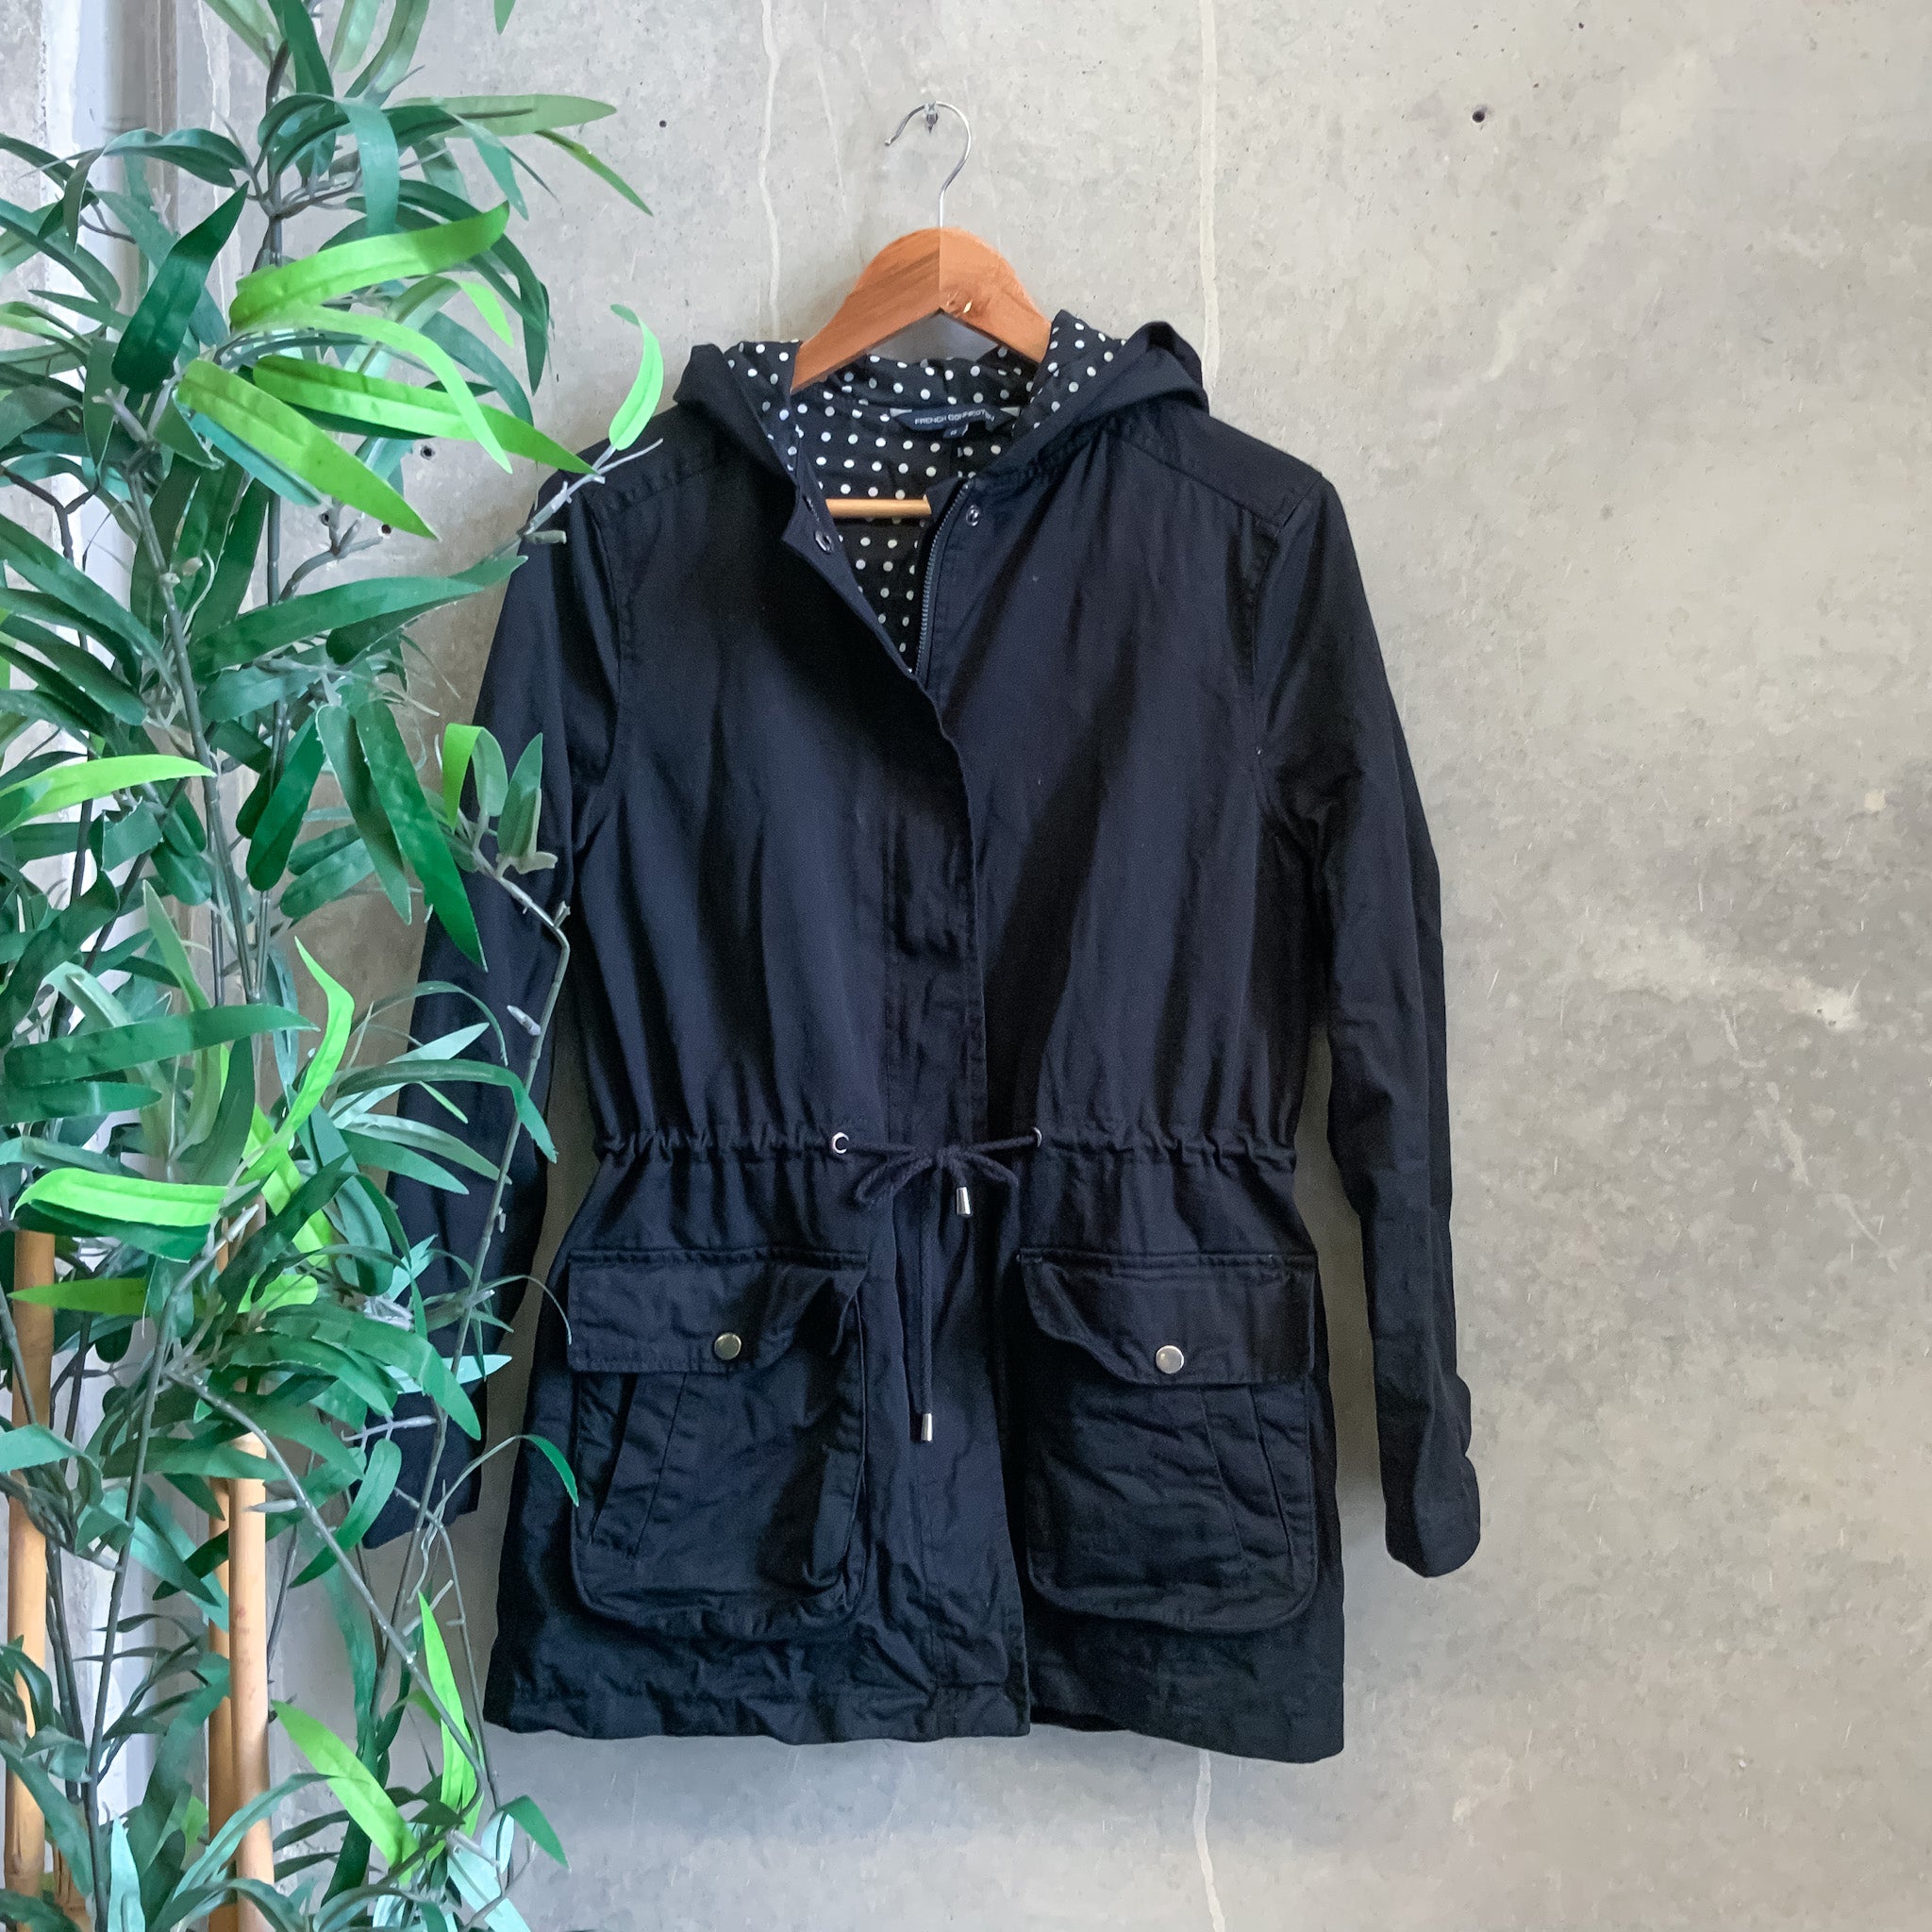 FRENCH CONNECTION Ladies Black Hooded Parka Jacket - Size 8